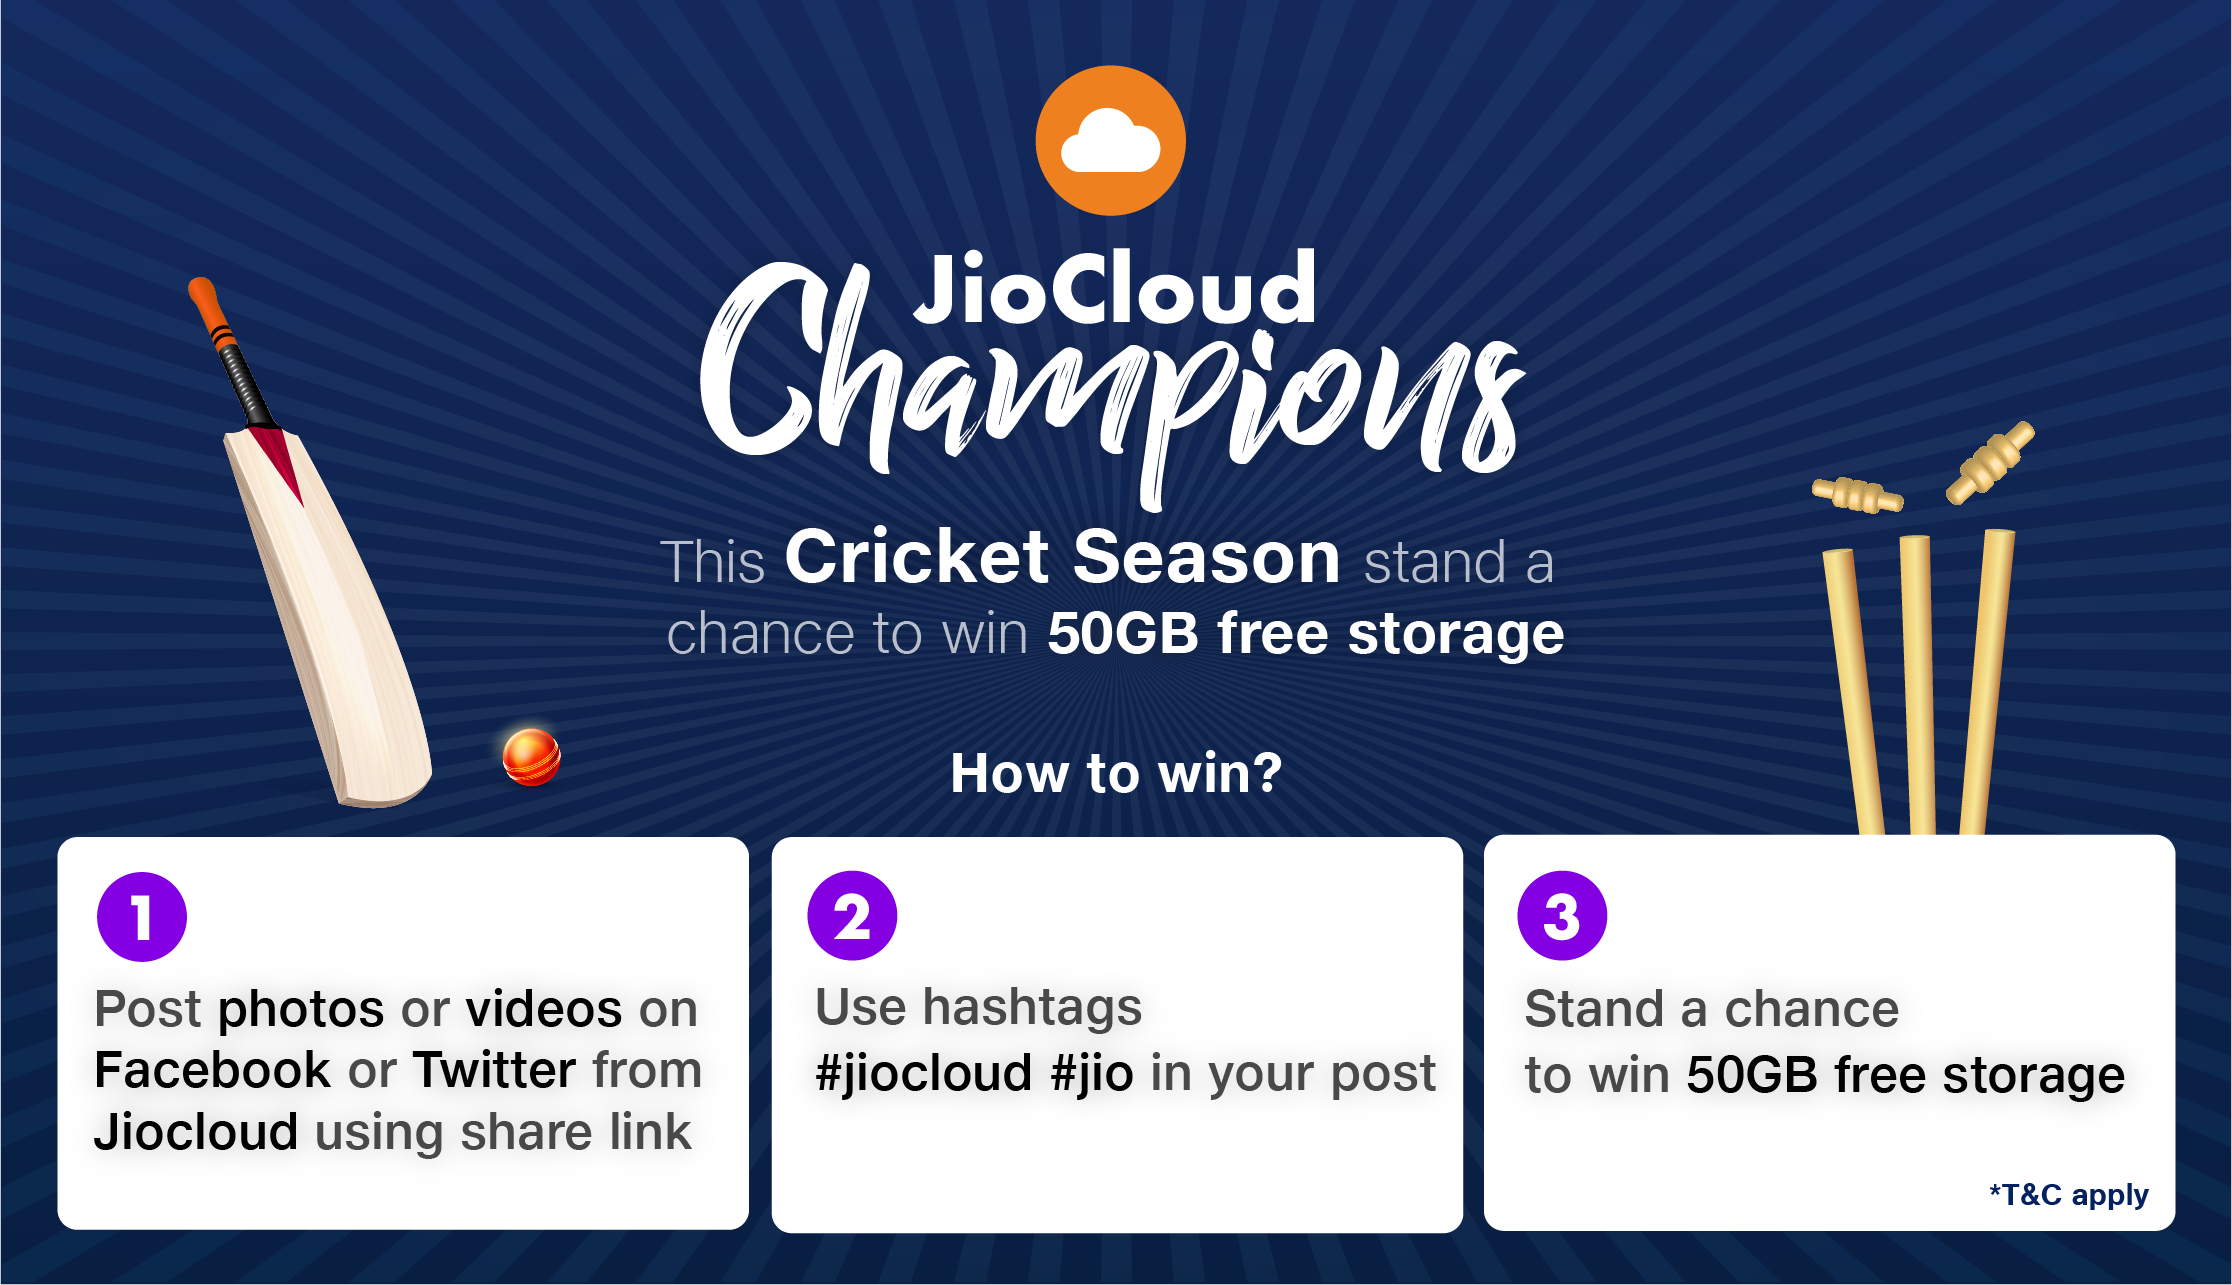 JioCloud Champions, This Cricket season stand a chance to win 50GB free storage